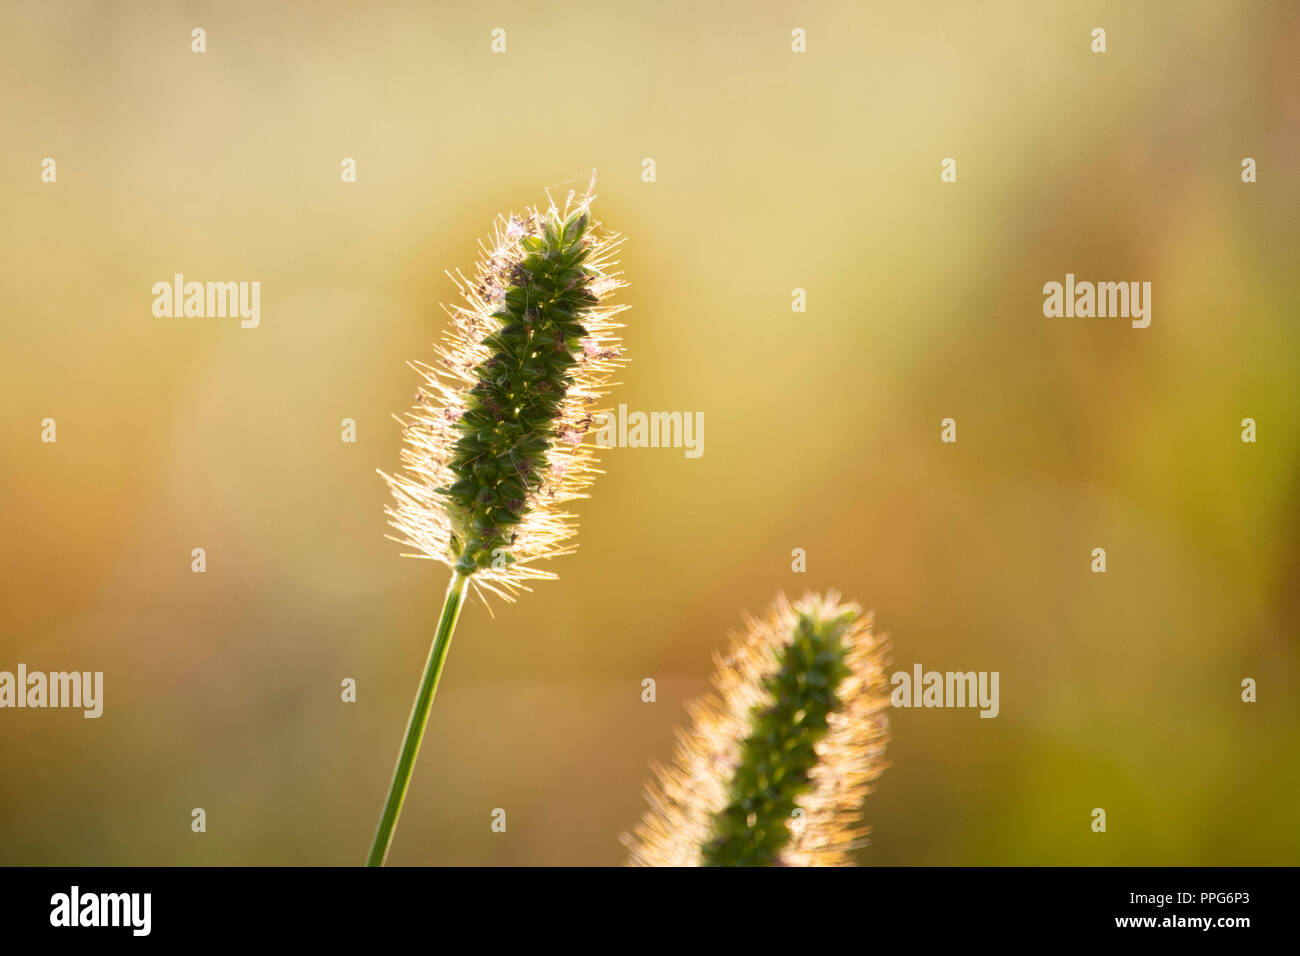 Awesome macro vision of single stem of grass Stock Photo - Alamy